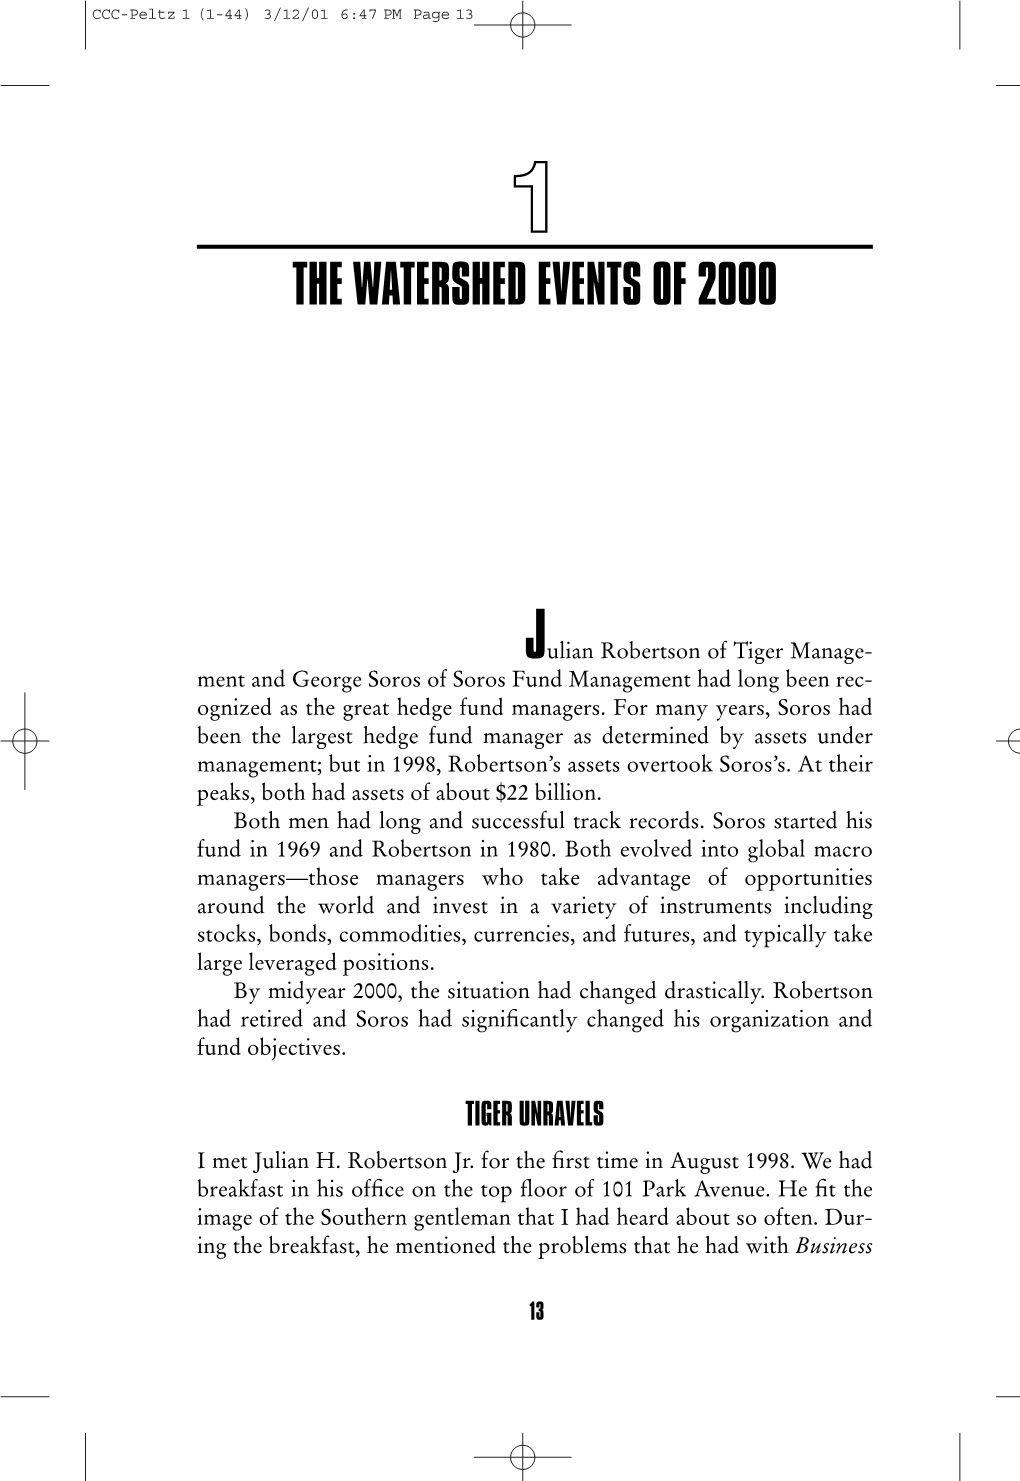 The Watershed Events of 2000